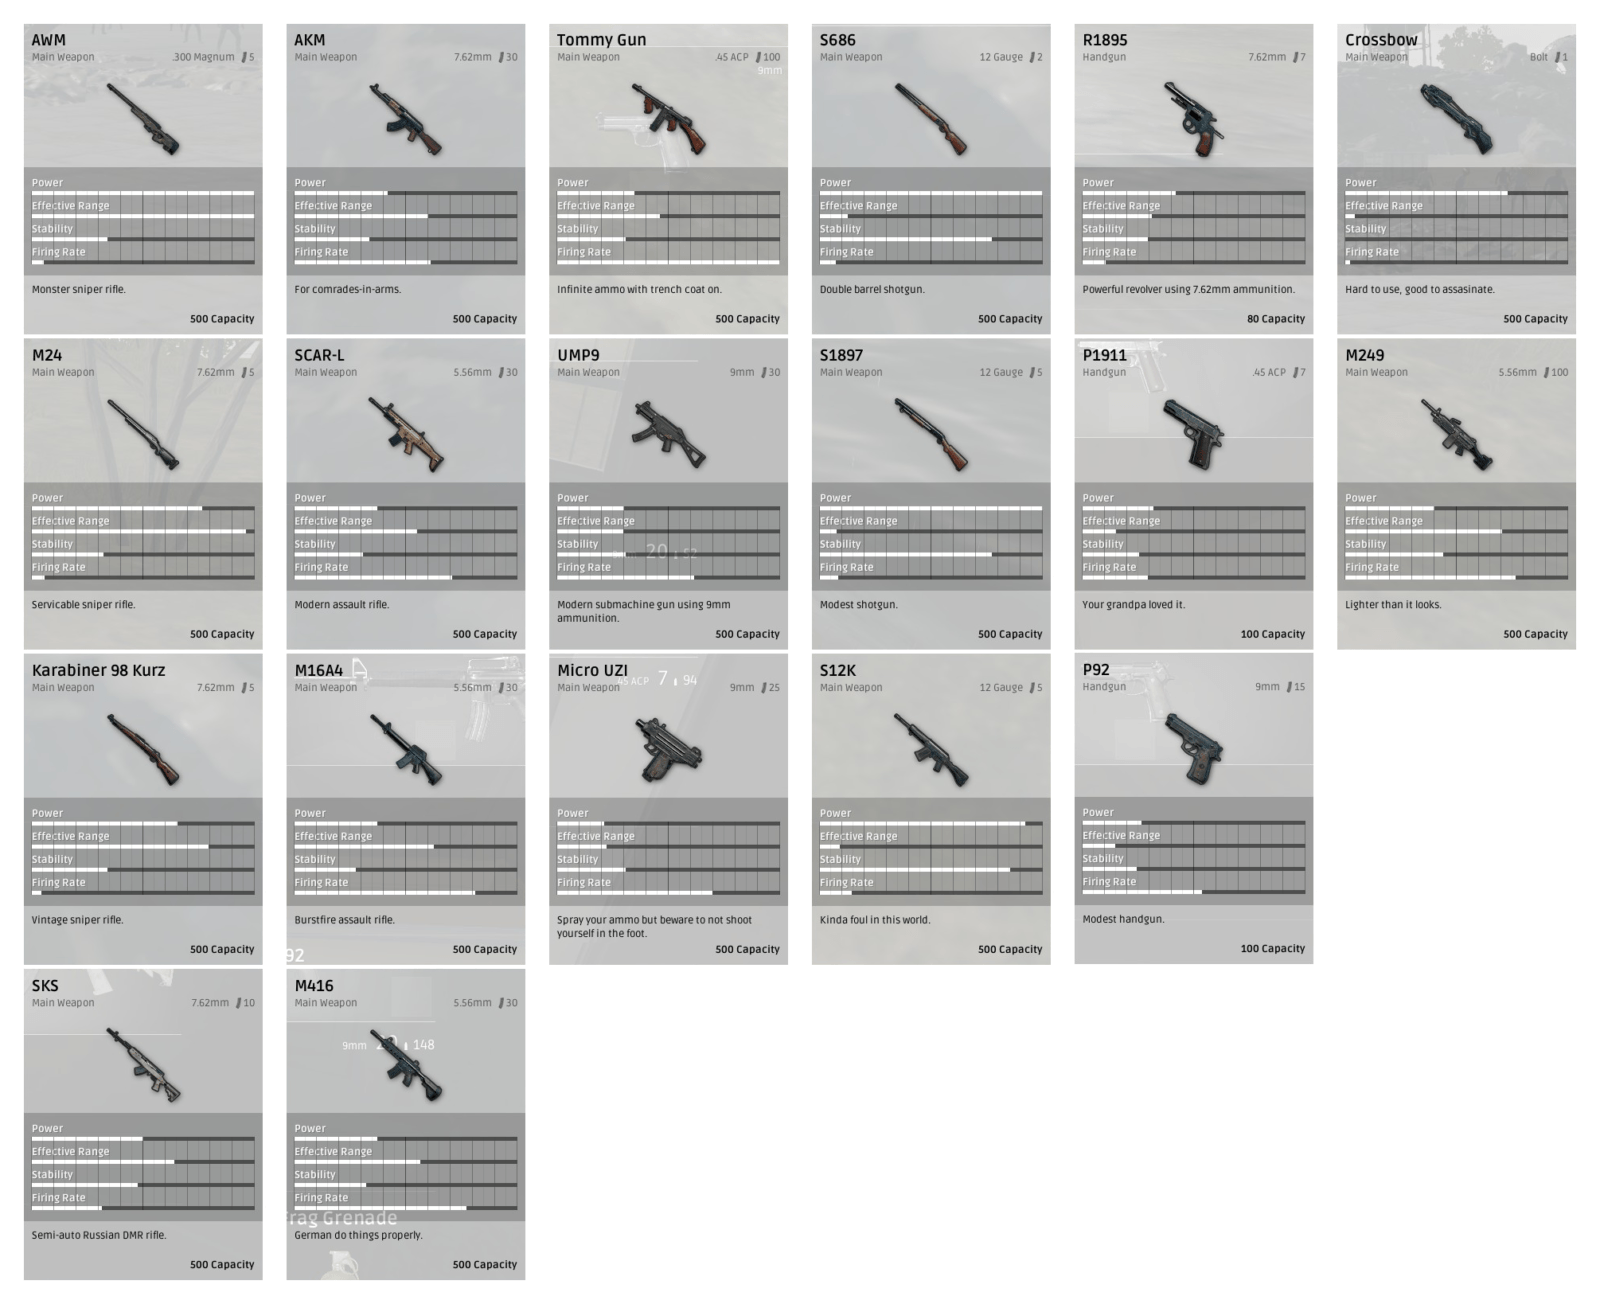 PLAYERUNKNOWN'S BATTLEGROUNDS All Weapon Stats Guide > MGW ... - 2010 x 1638 png 1105kB